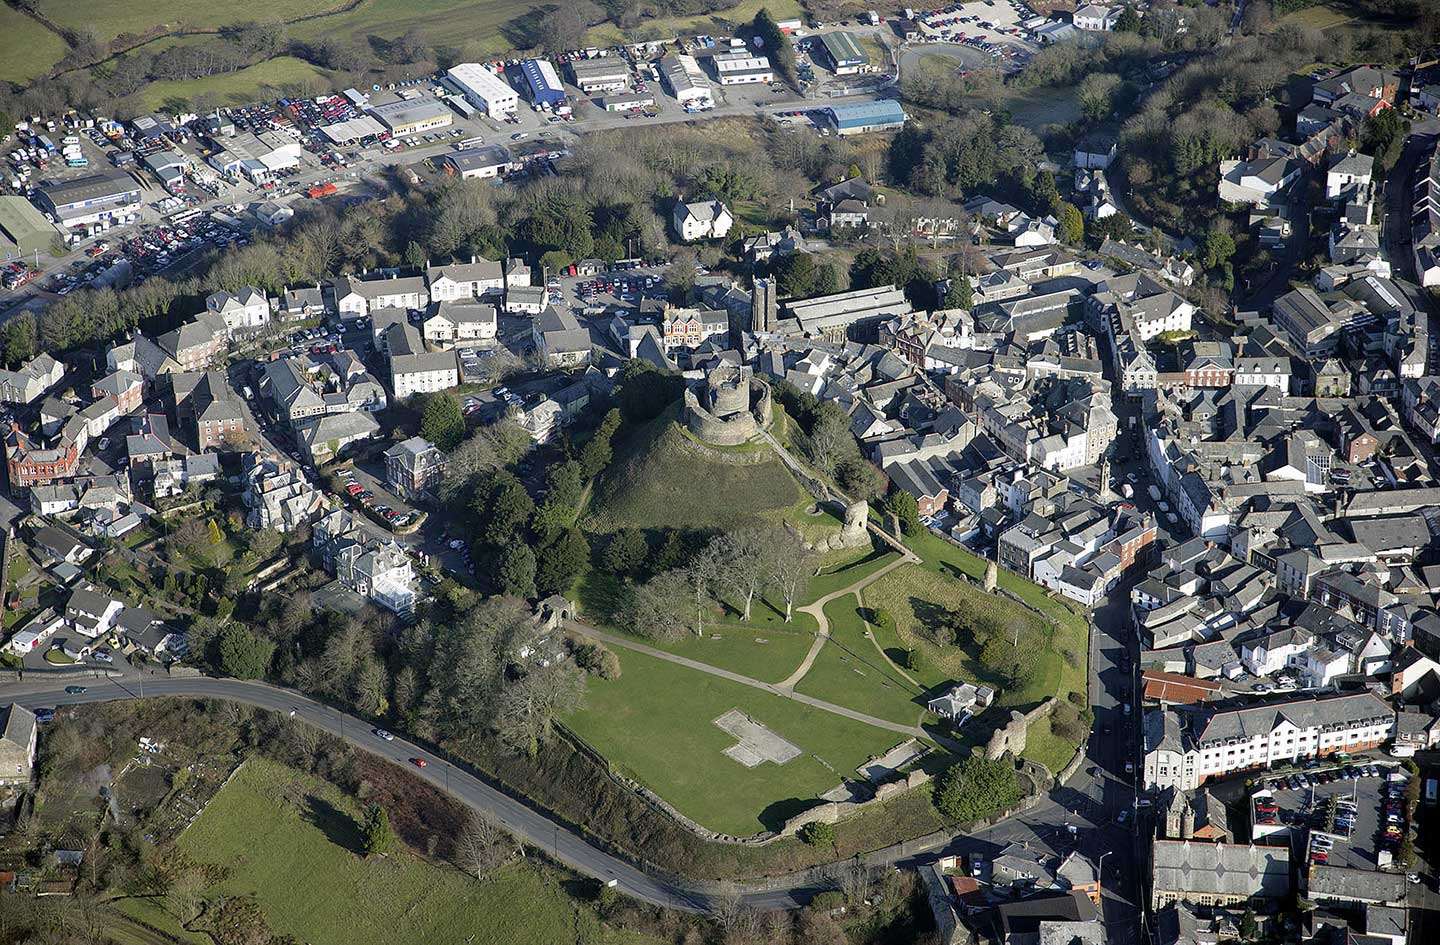 An aerial view of Launceston Castle and town